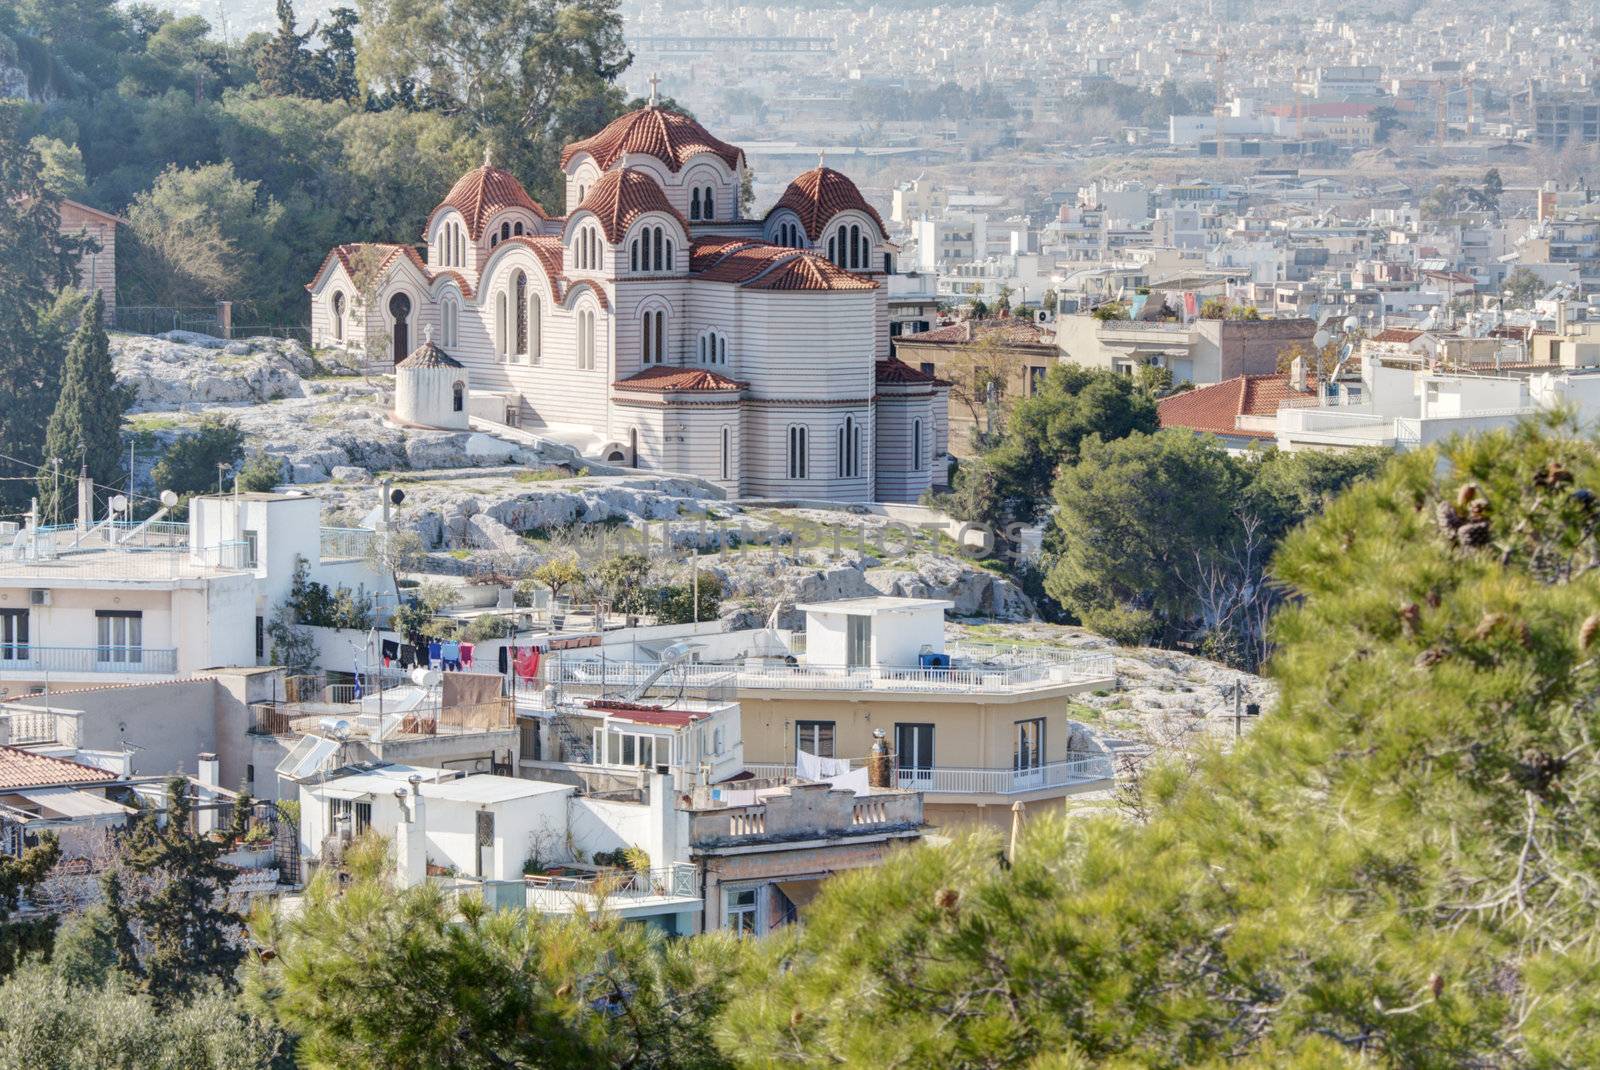 Agia Marina or Saint Marina orthodox church situated on the Hill of the Nymphs in Athens, Greece. The city of Athens can be seen in the background.